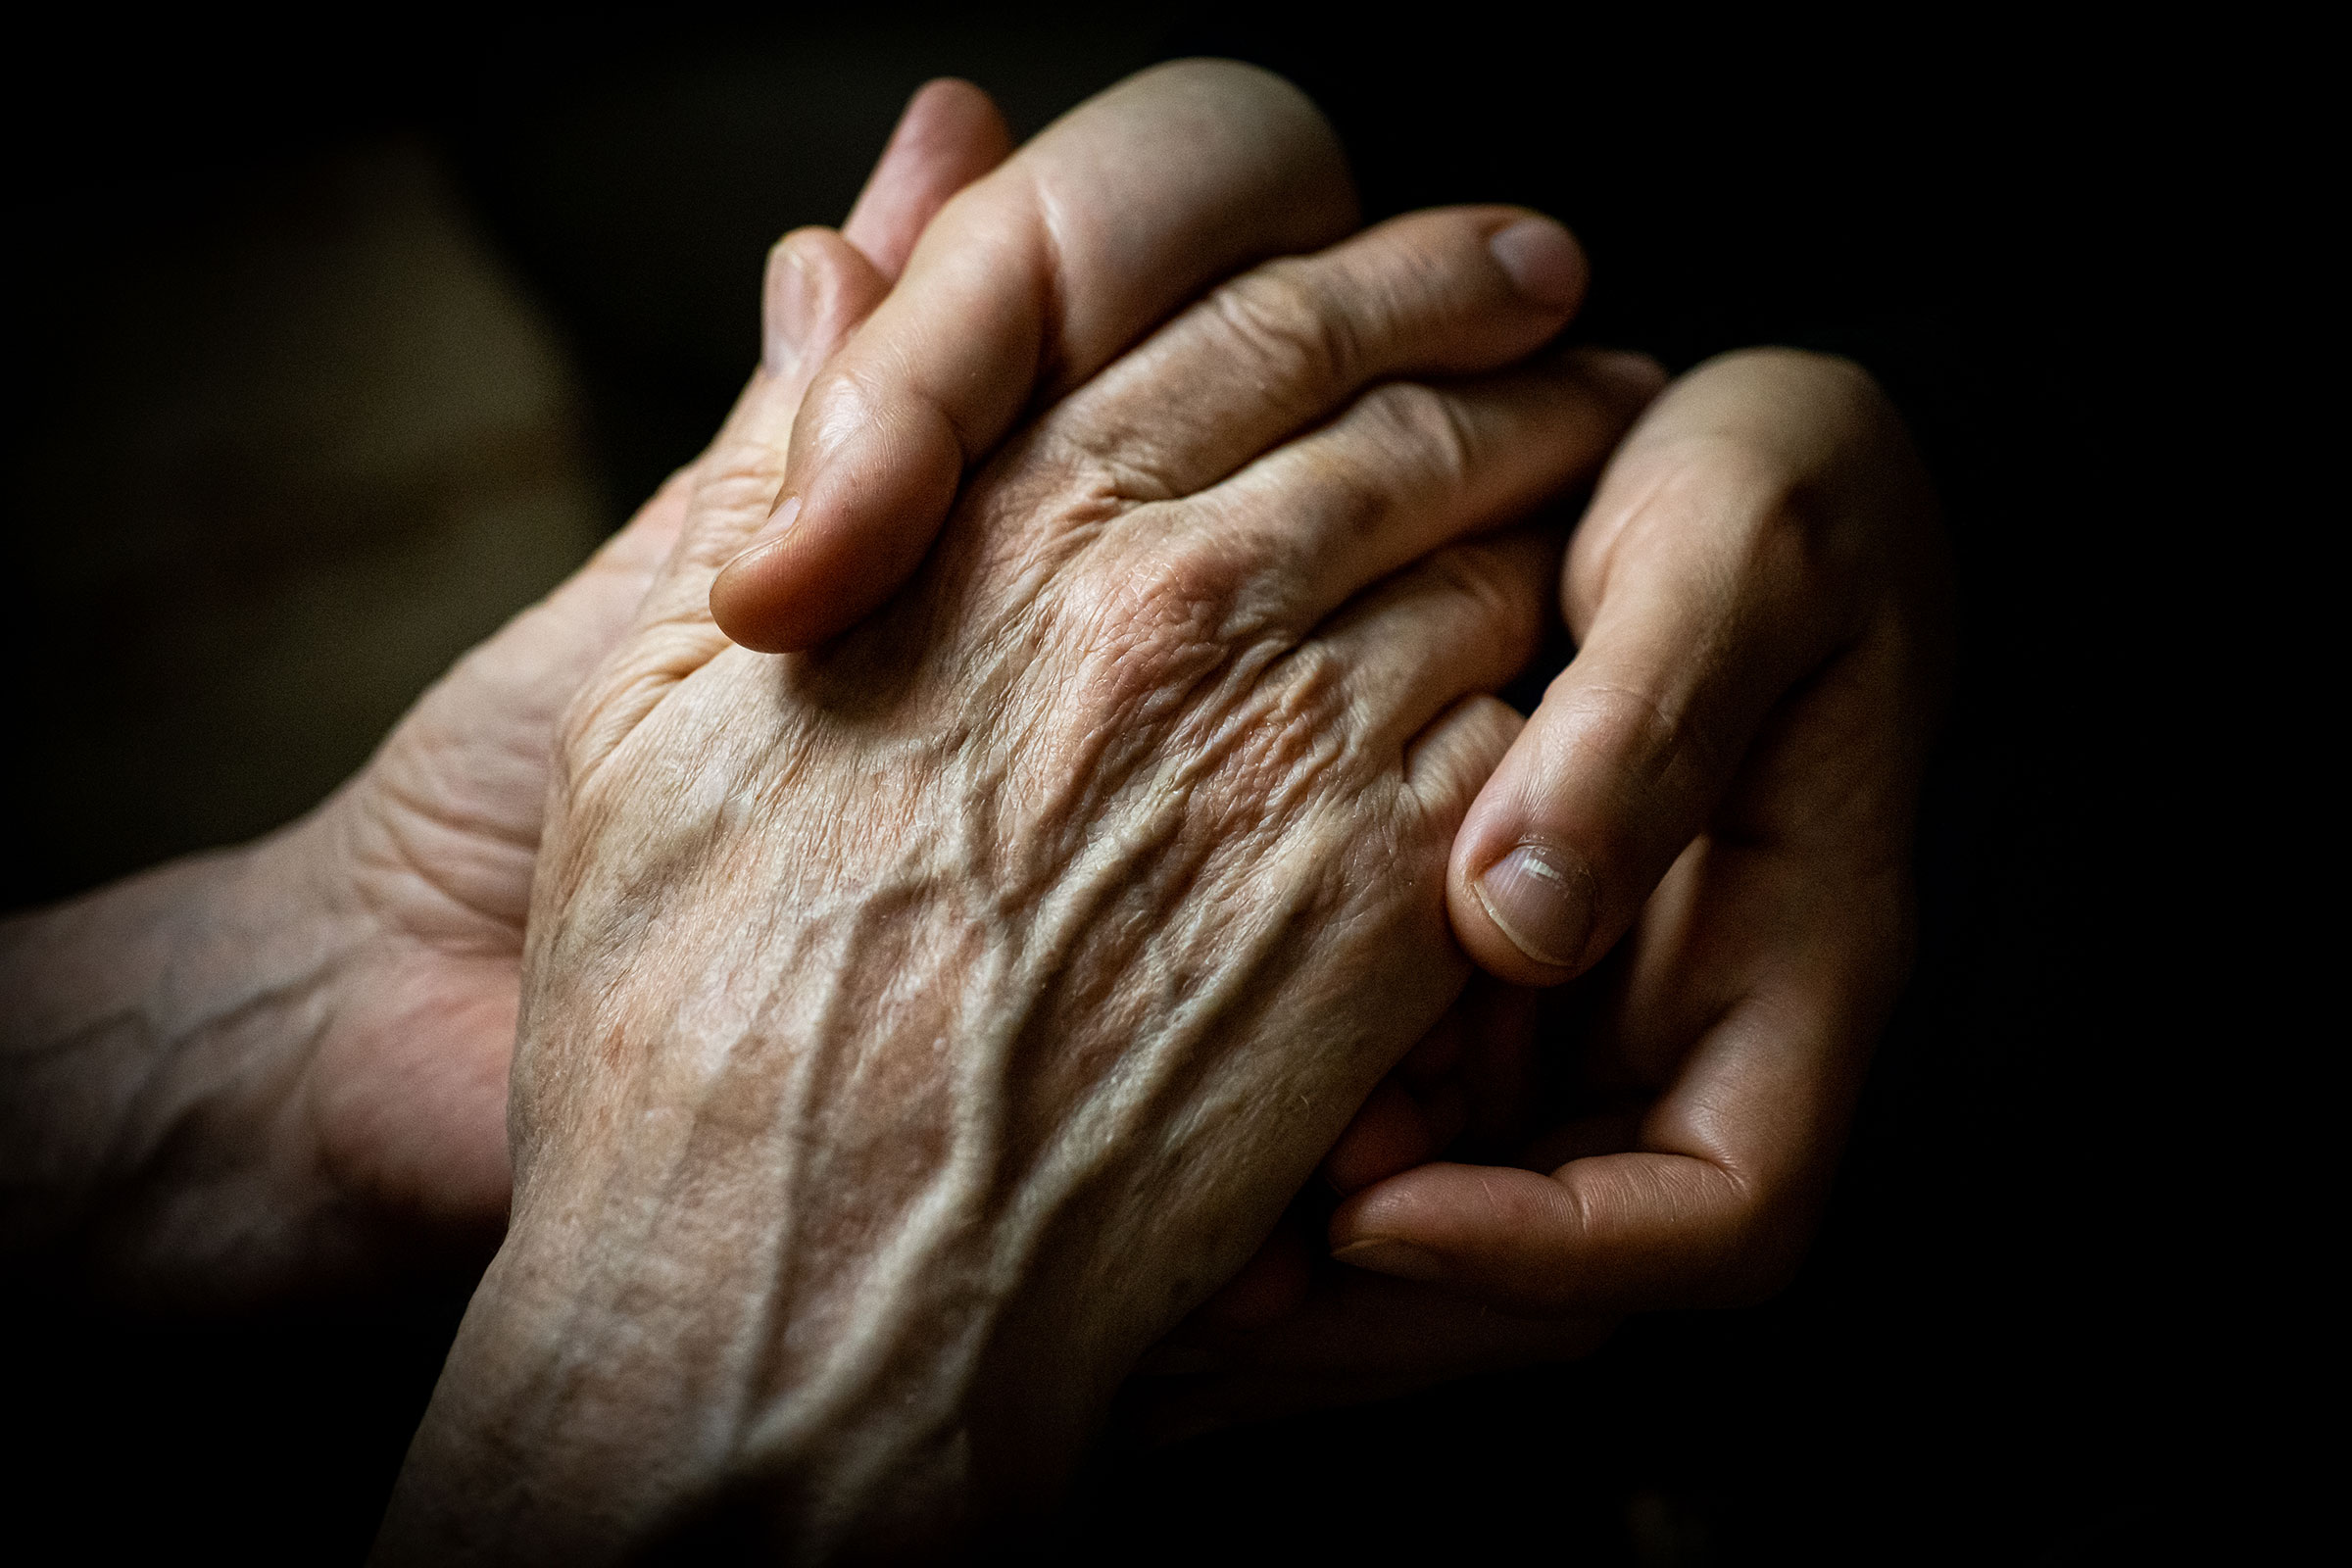 Caring for loved ones is a universal need, writes Ai-jen Poo. (Getty Images)